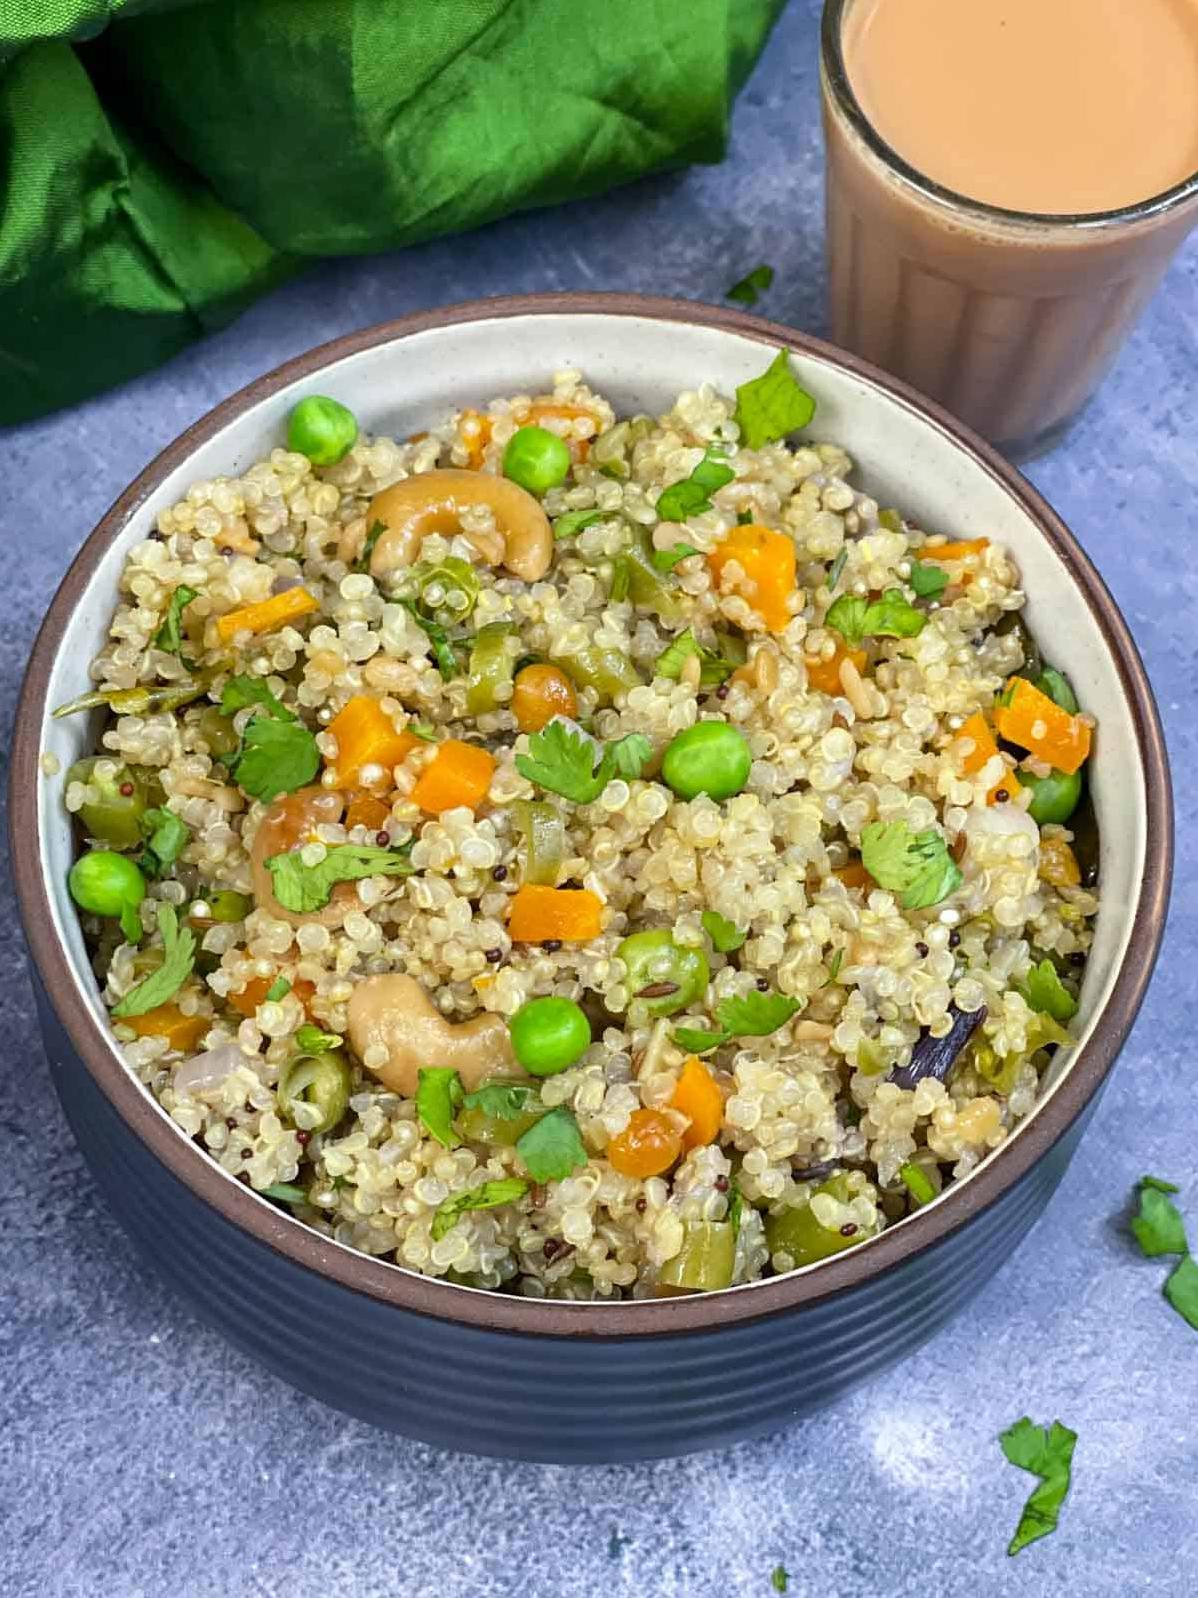  Our Quinoa Pilaf recipe is sure to be a crowd-pleaser at any dinner party!